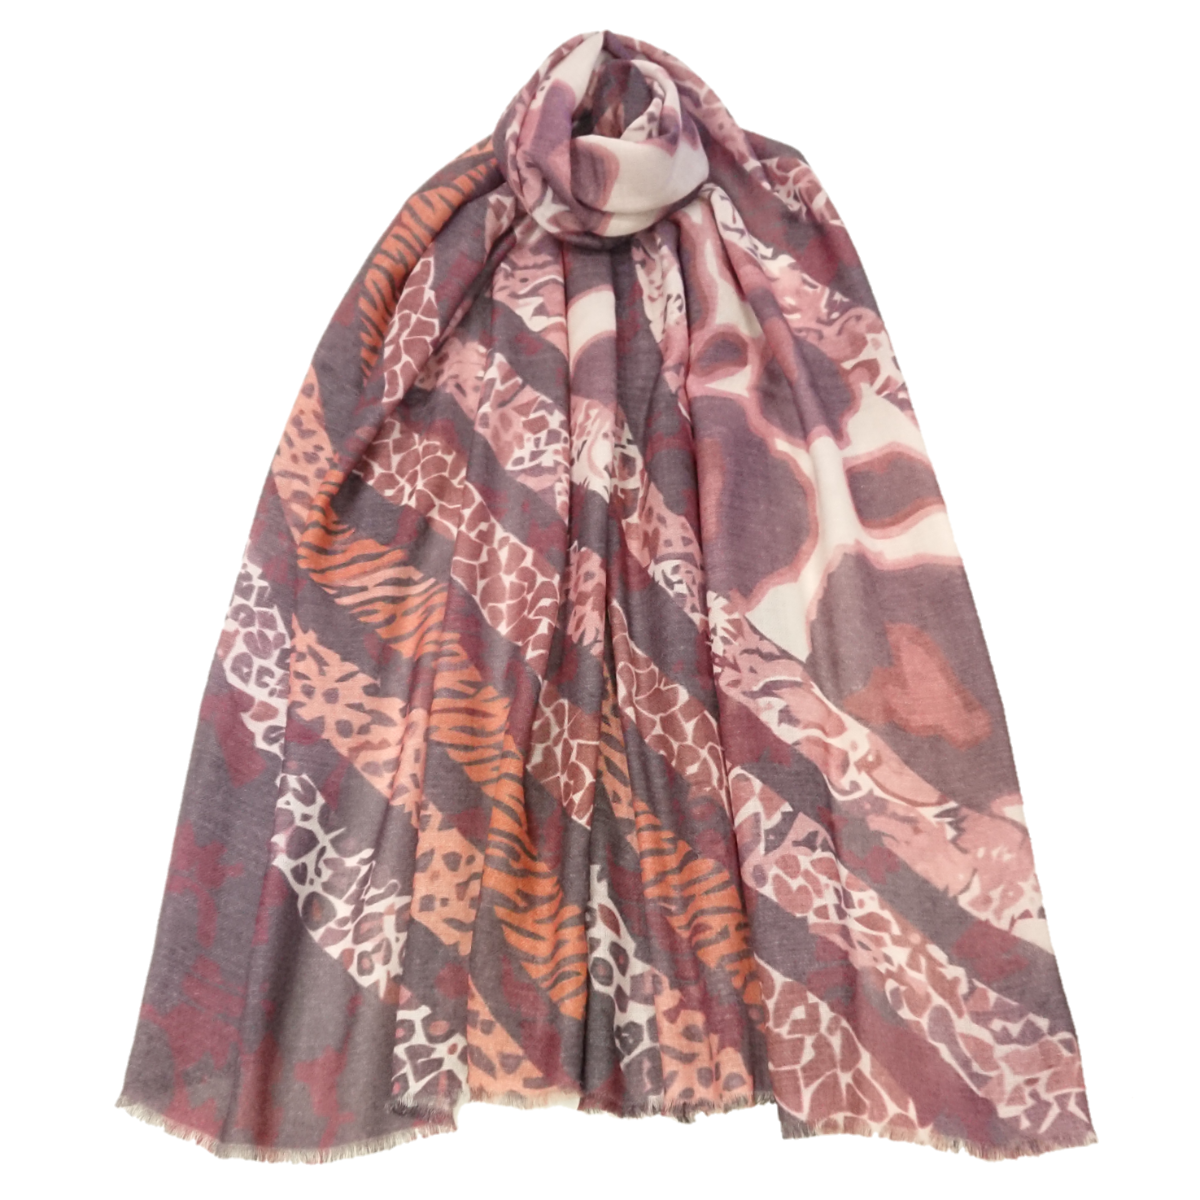 Ltd Edition 100% Pure Pashmina Cashmere Stole - Large Scarf - Abstract Pelts Patterns Print